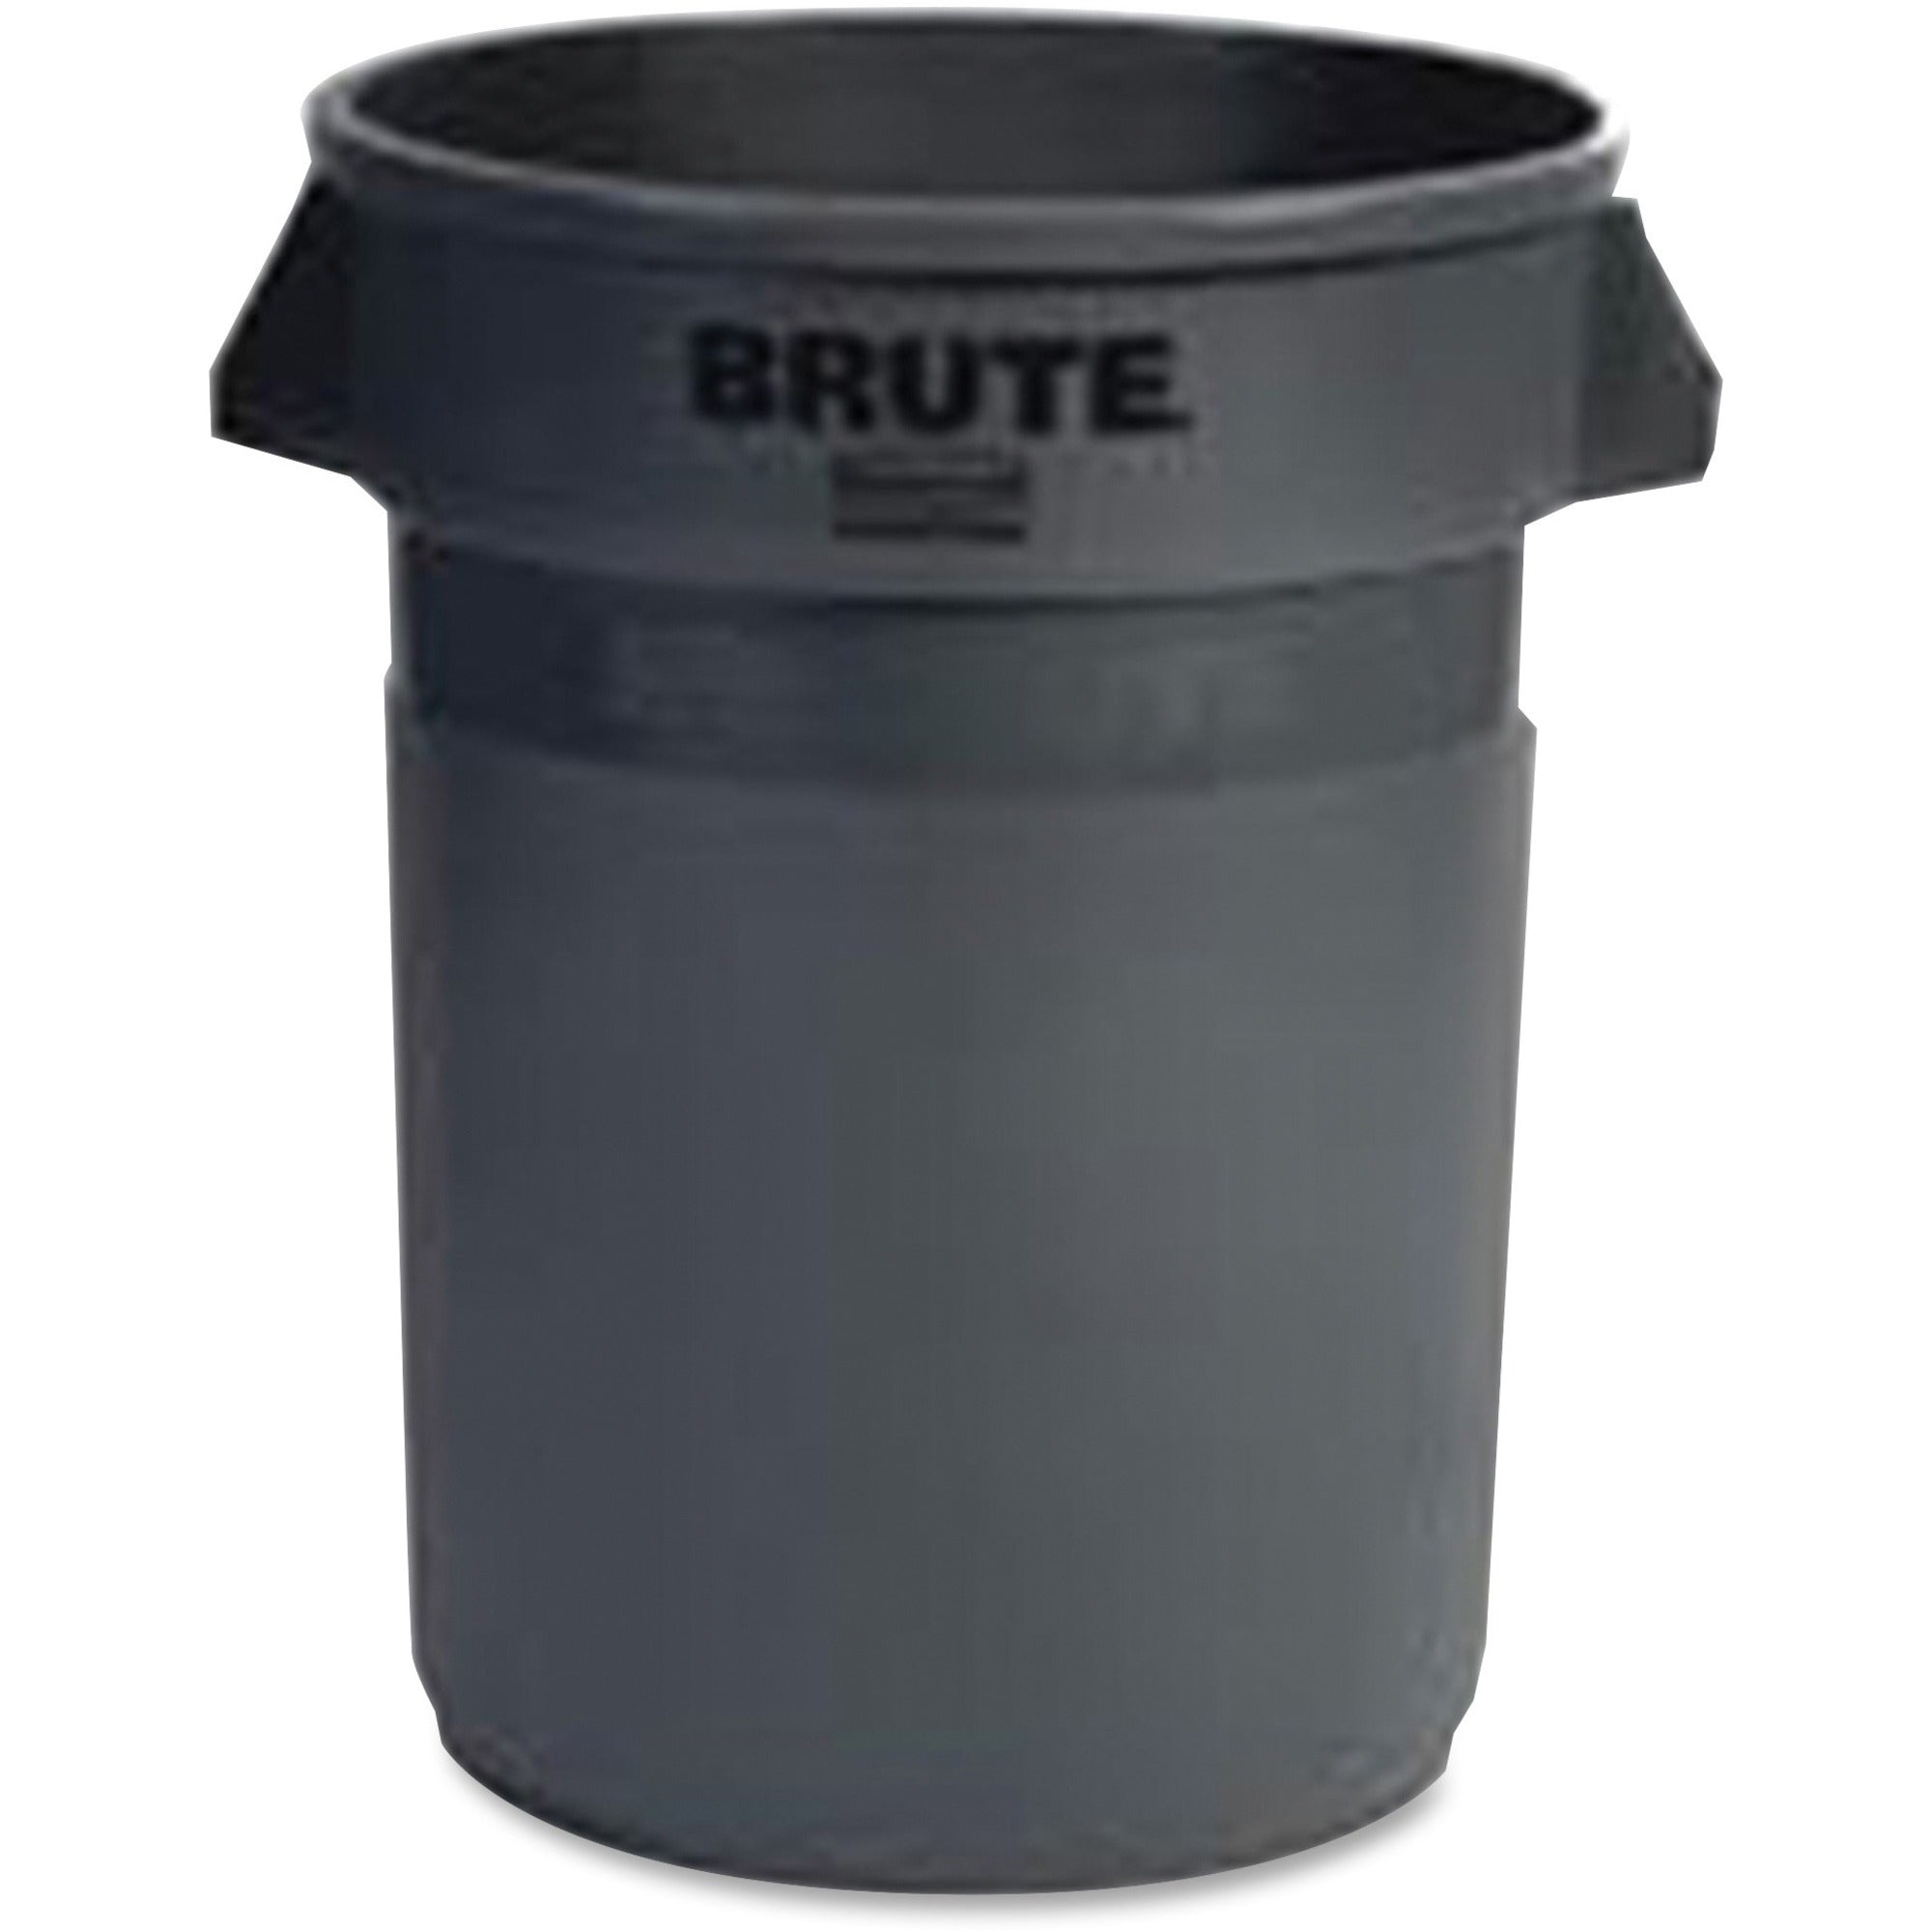 Rubbermaid Commercial Vented Brute 32-gallon Container - 32 gal Capacity - Round - Manual - UV Resistant, Vented, Fade Resistant, Crack Resistant, Crush Resistant, Warp Resistant, Reinforced Base, Durable, Tear Resistant, Damage Resistant, Contoured